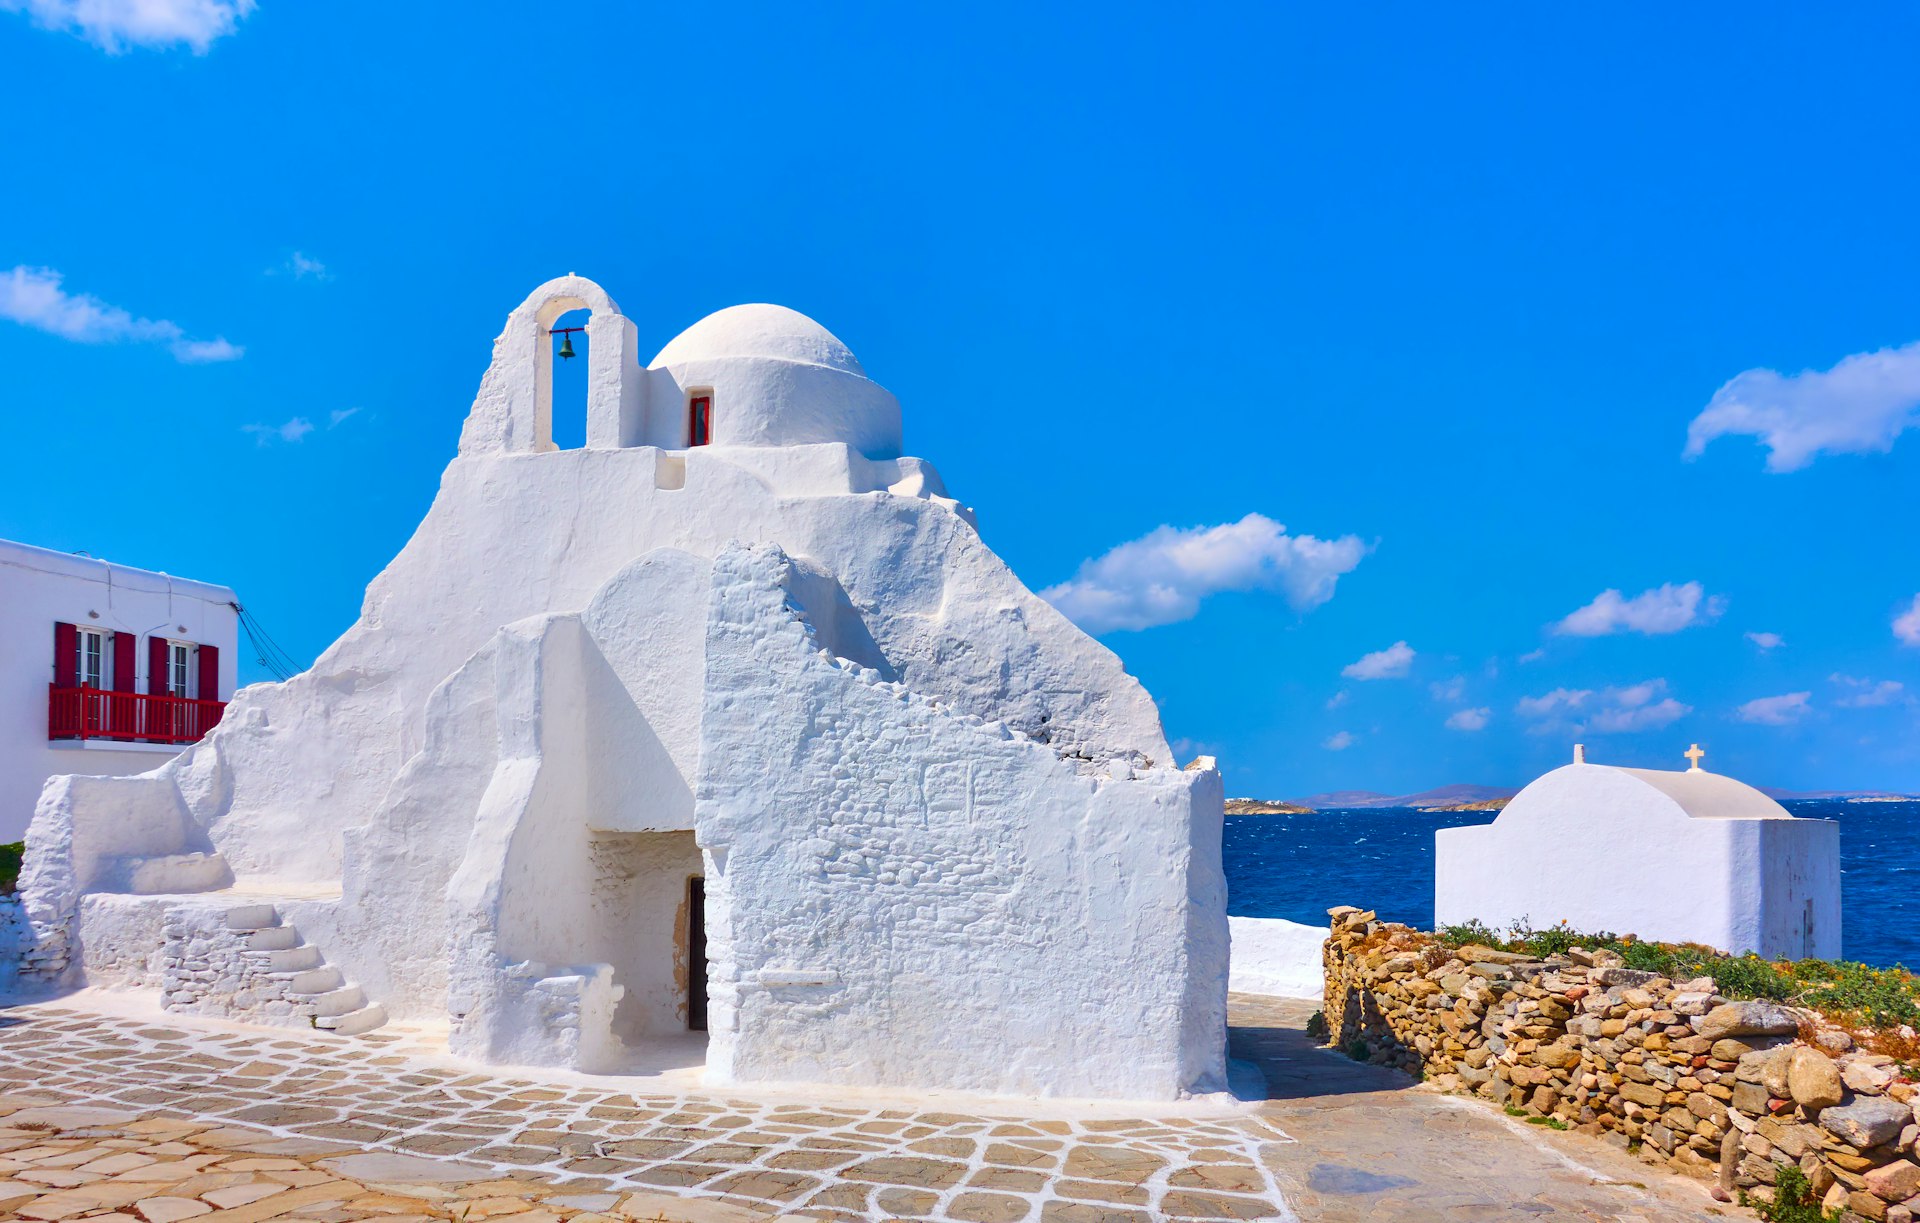 Ancient Panagia Paraportiani, a small white church, on Mykonos Island on a clear day